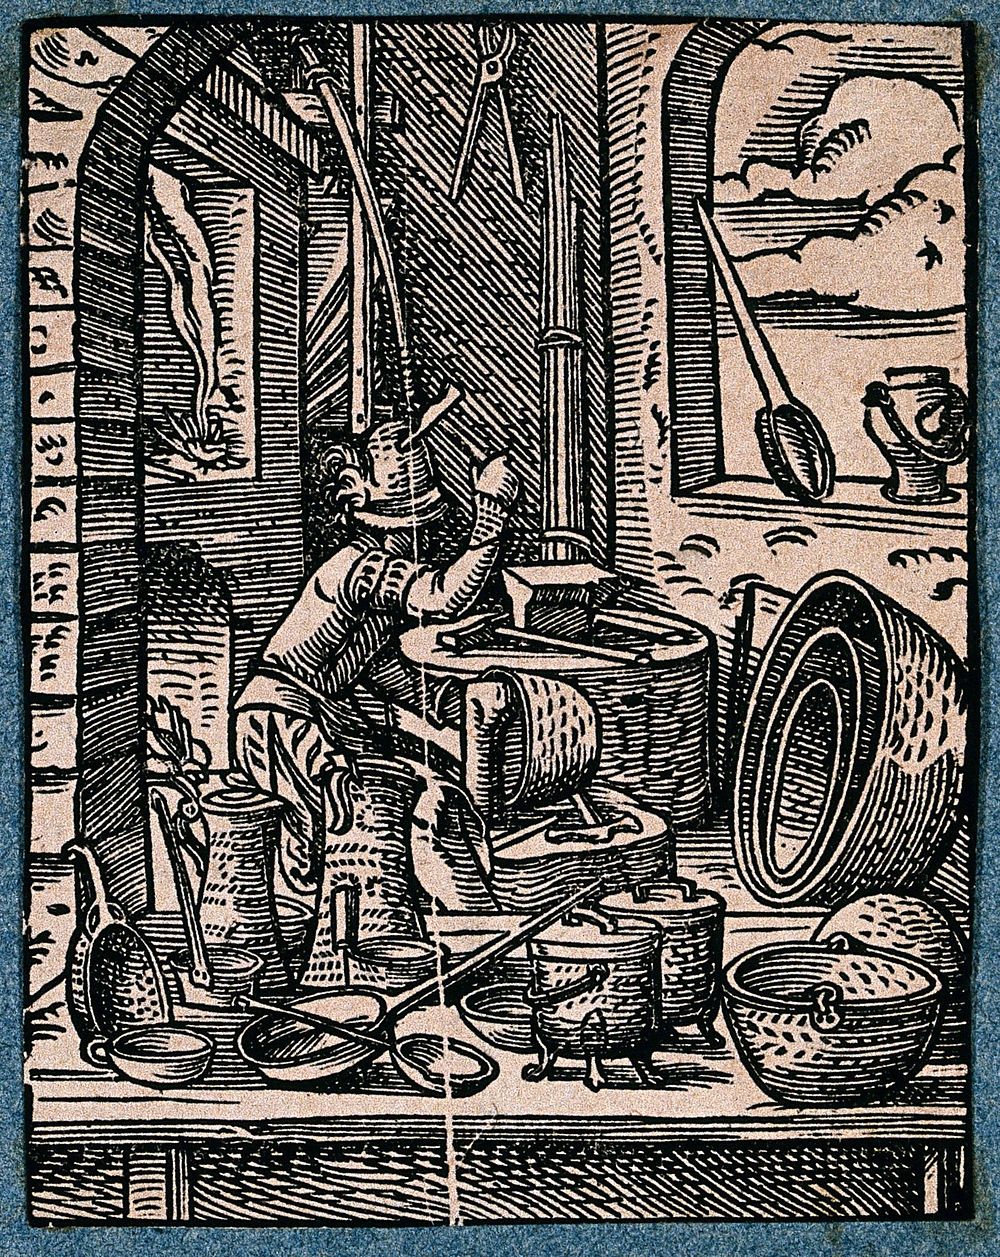 A coppersmith is surrounded by items he is making, including pans, cauldrons and jugs. Woodcut by J. Amman, 1568.